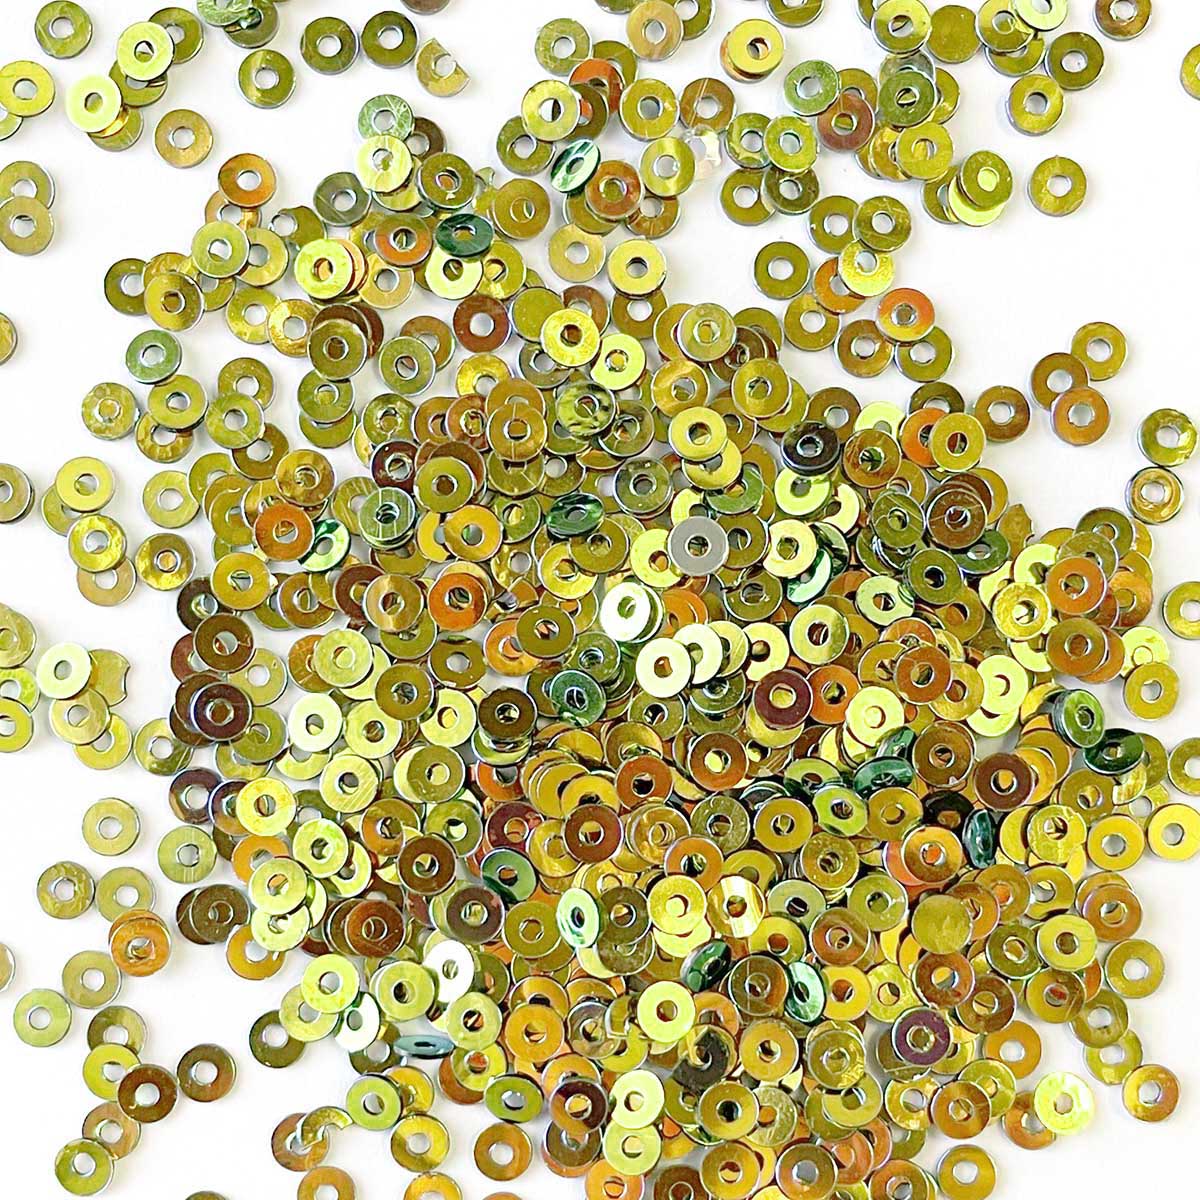 www.colourstreams.com.au Colour Streams Sequins Embellishments Costumes Mardi Gras Dancing Ballet Theatre Shows Drag Queen Bling Costuming Embellishments Australia USA Canada NZ Flat Circle Shape Iridescent Reflective Shiny Green with Copper and Gold Lights 4mm S260